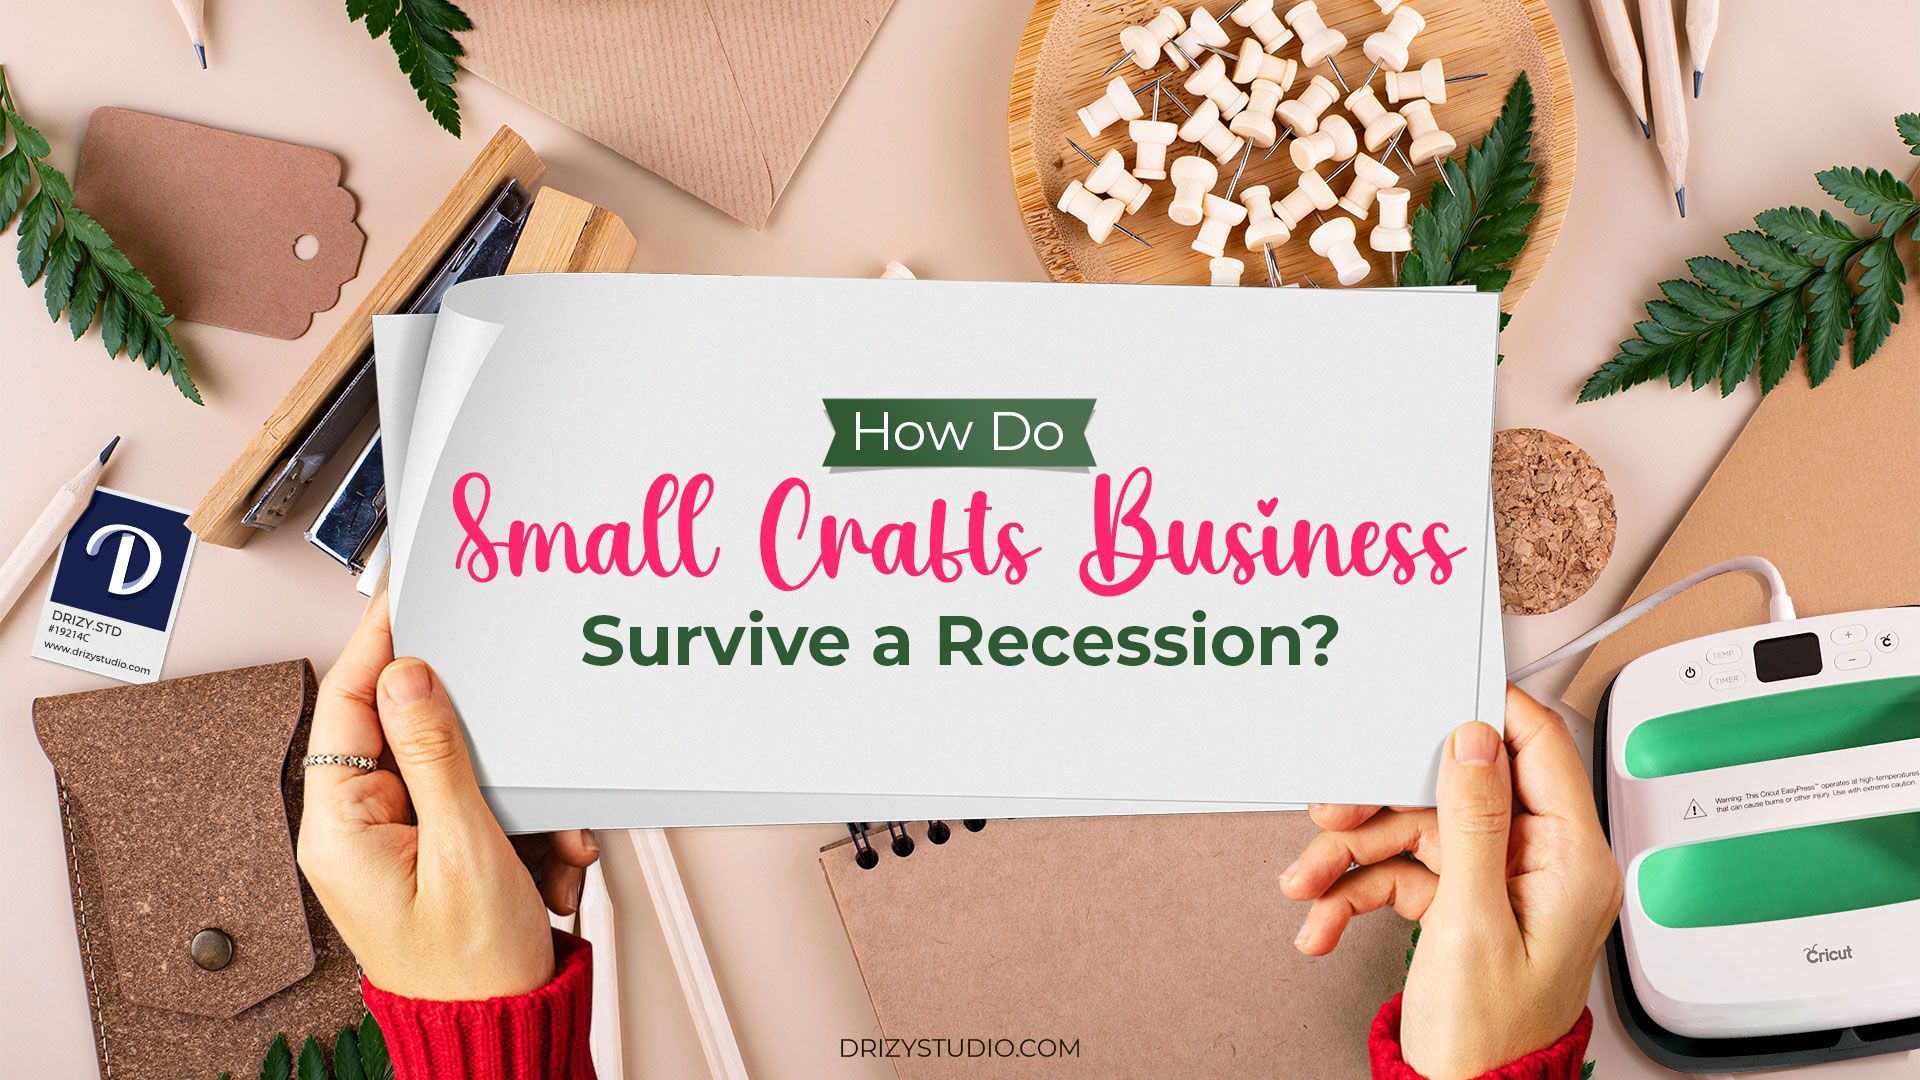 How Do Small Crafts Business Survive a Recession cover